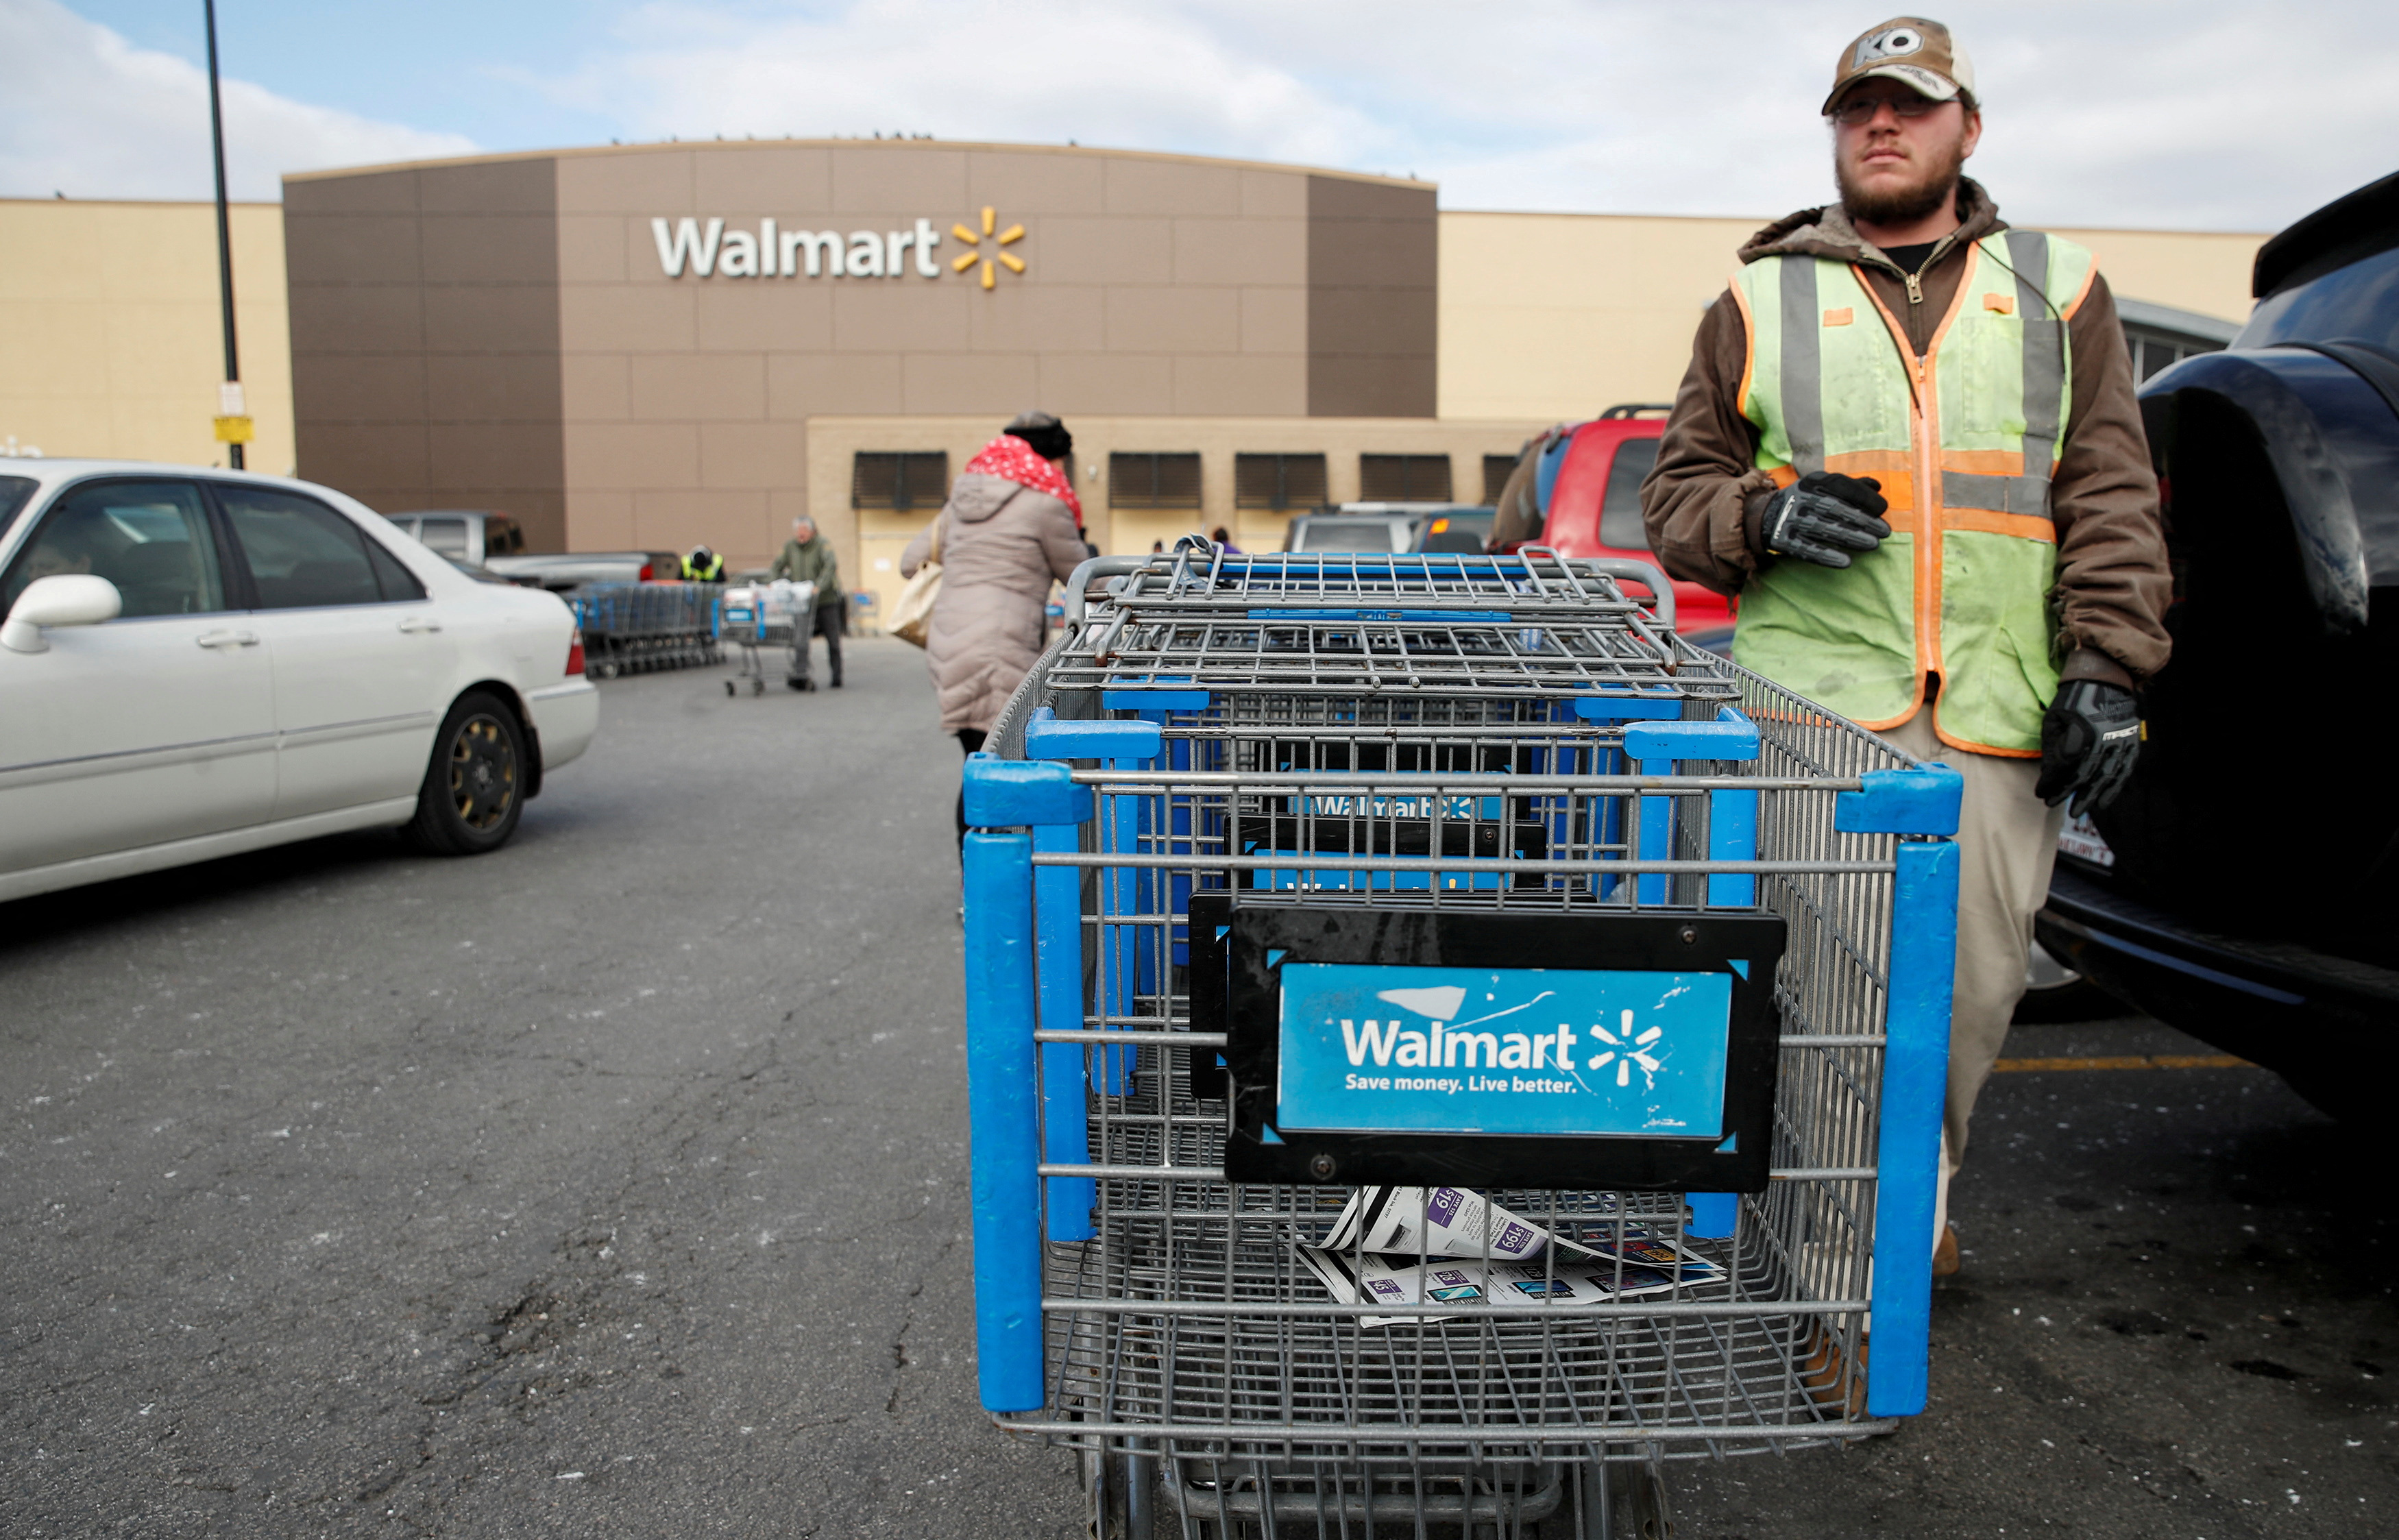 Walmart Earnings: Full-Year Outlook Lifted as Quarterly Sales